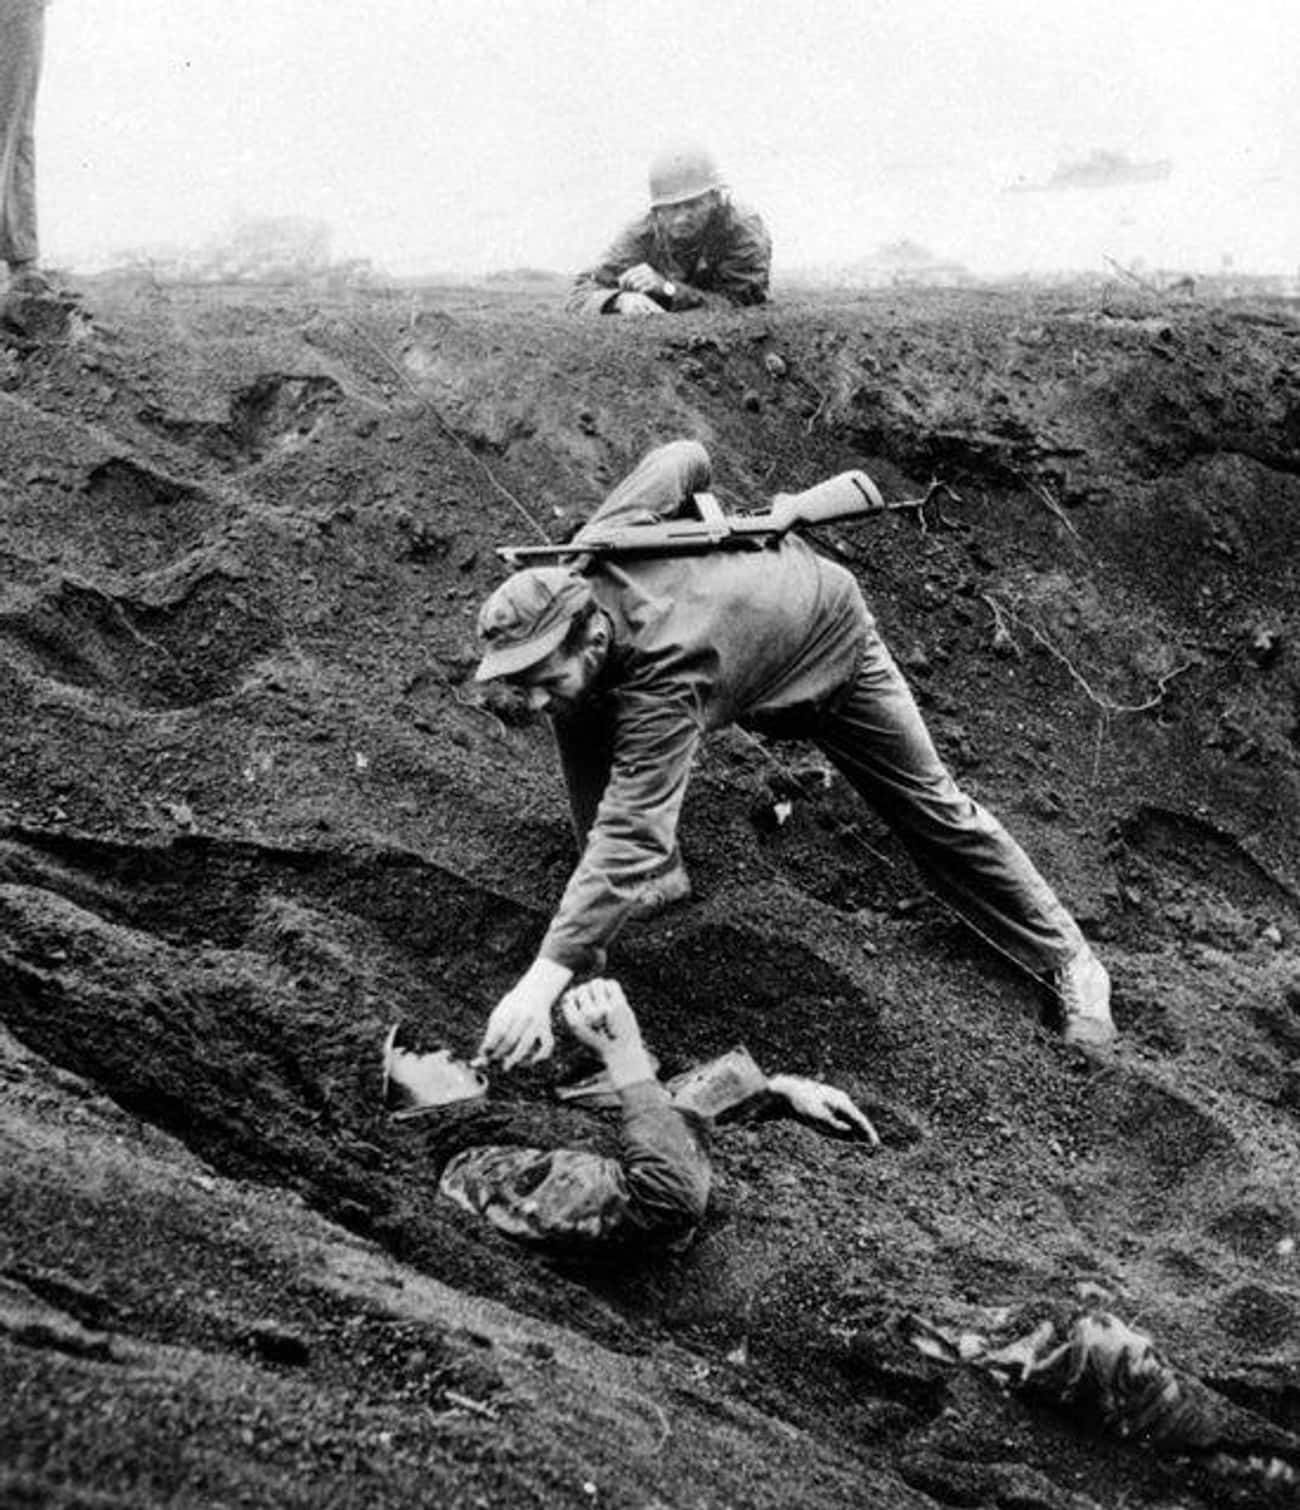 The Japanese Soldier Had Been Hiding, Buried, For 36 Hours